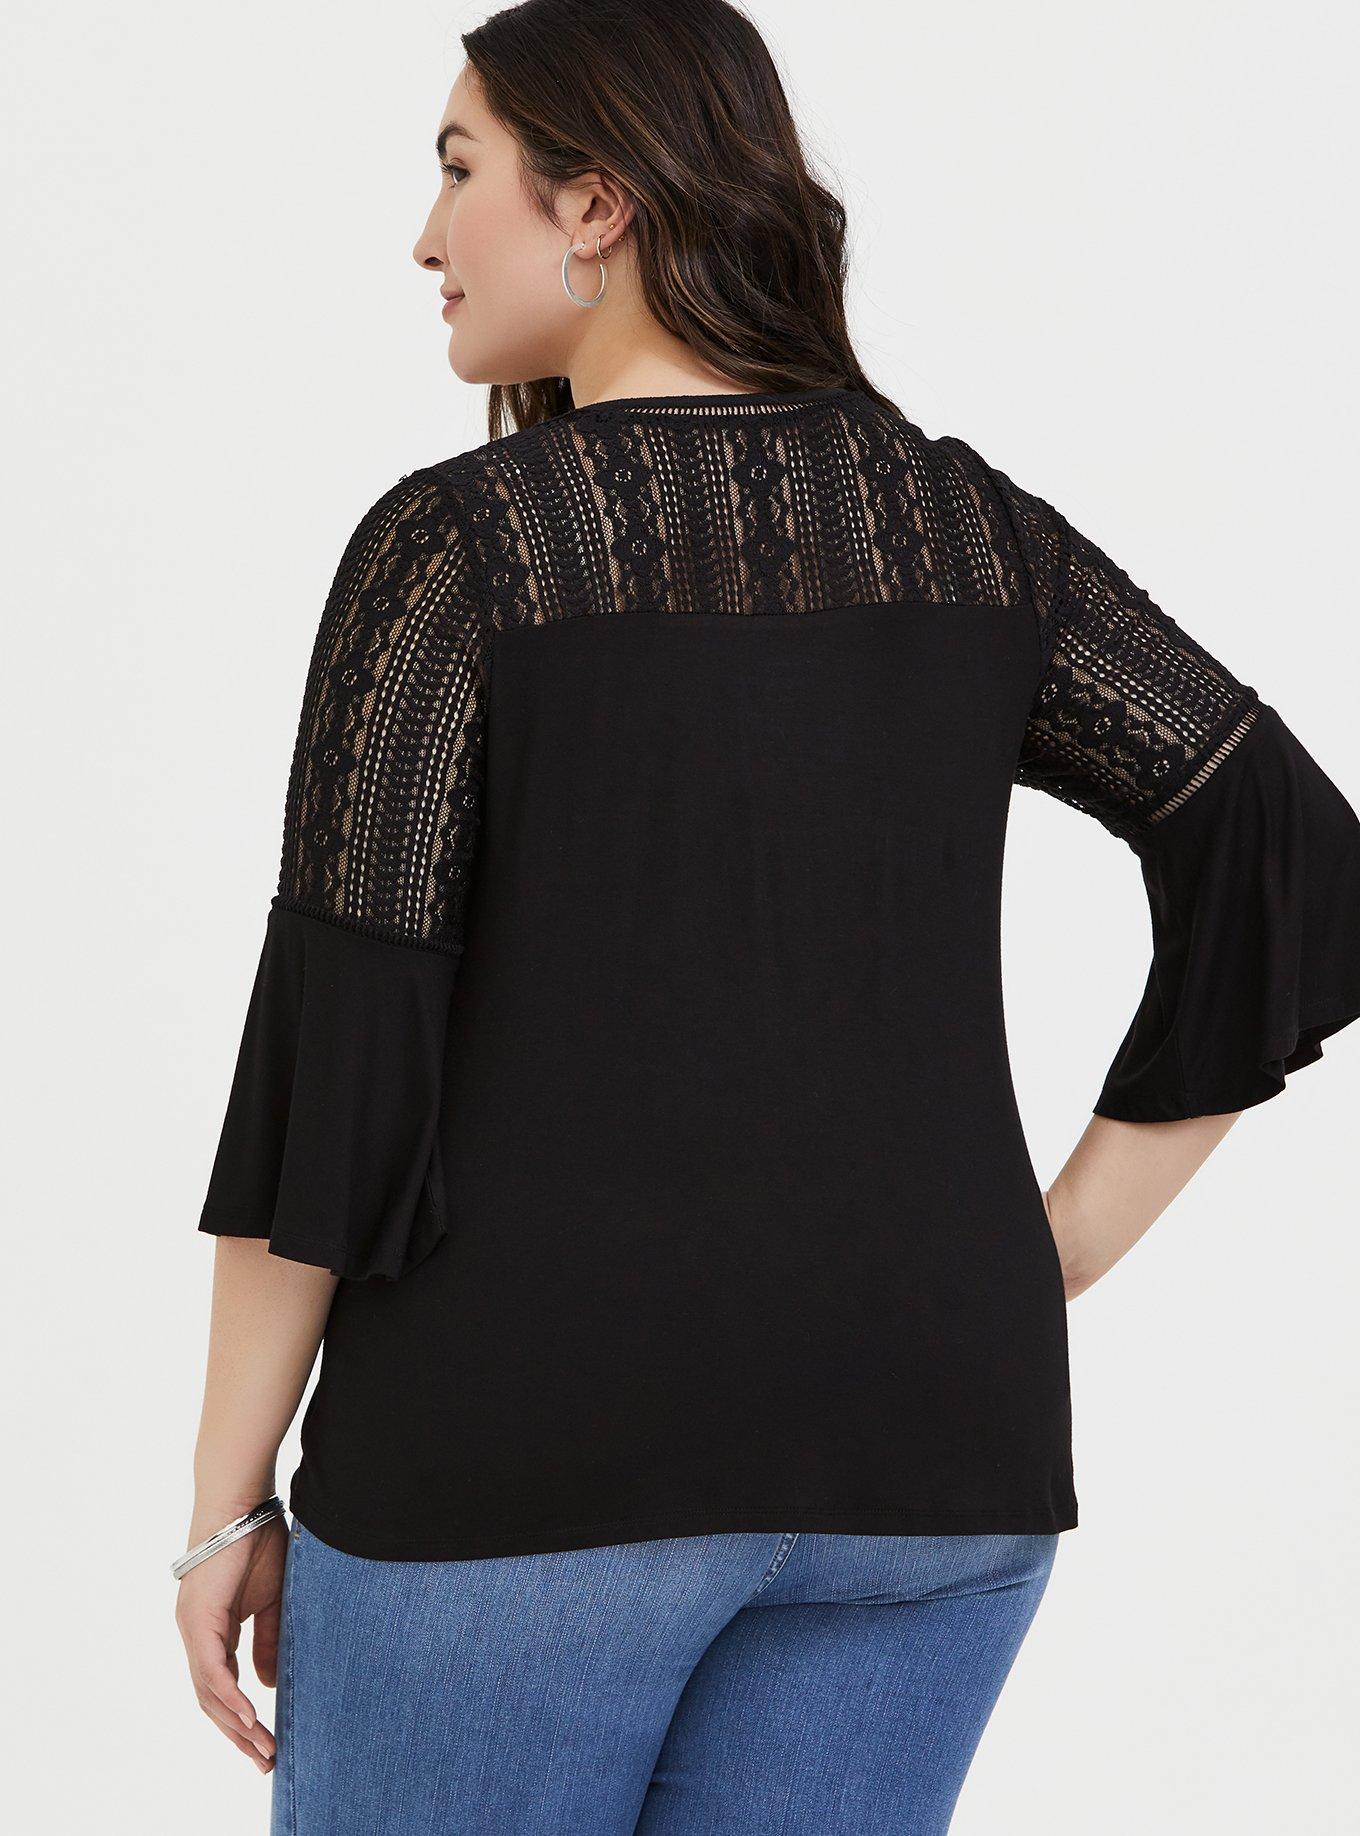 Lace Inset Flare Sleeve Sweater Black